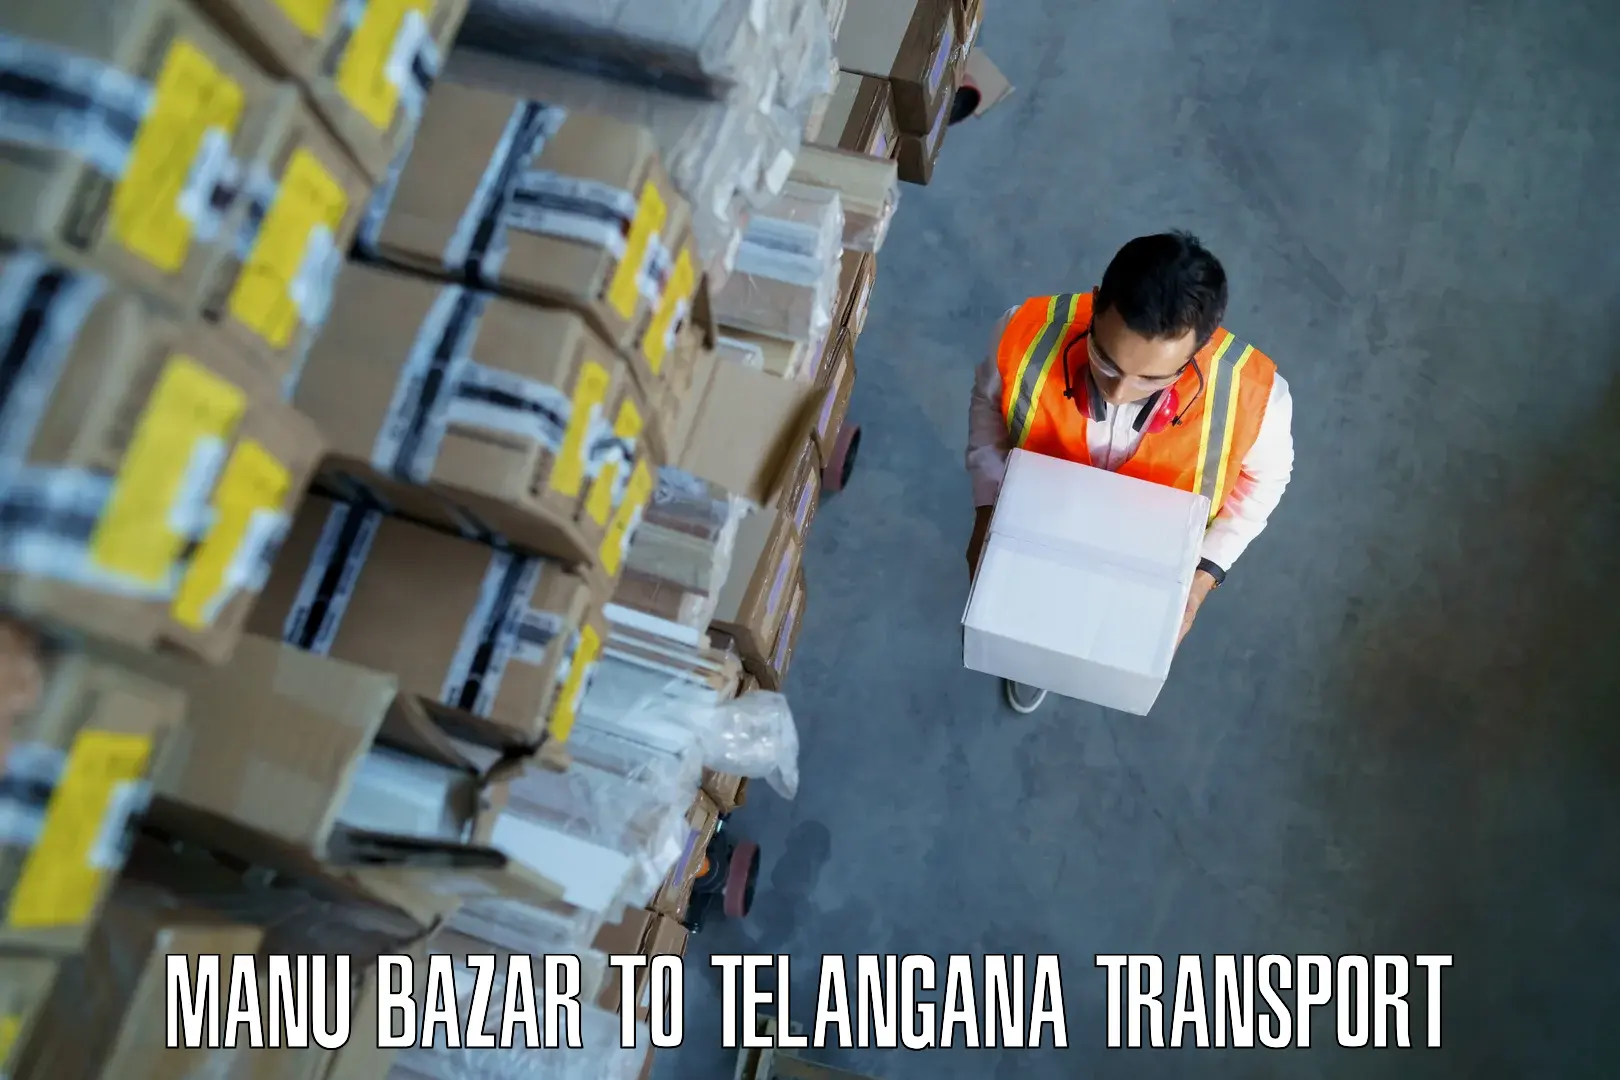 Air freight transport services in Manu Bazar to Telangana